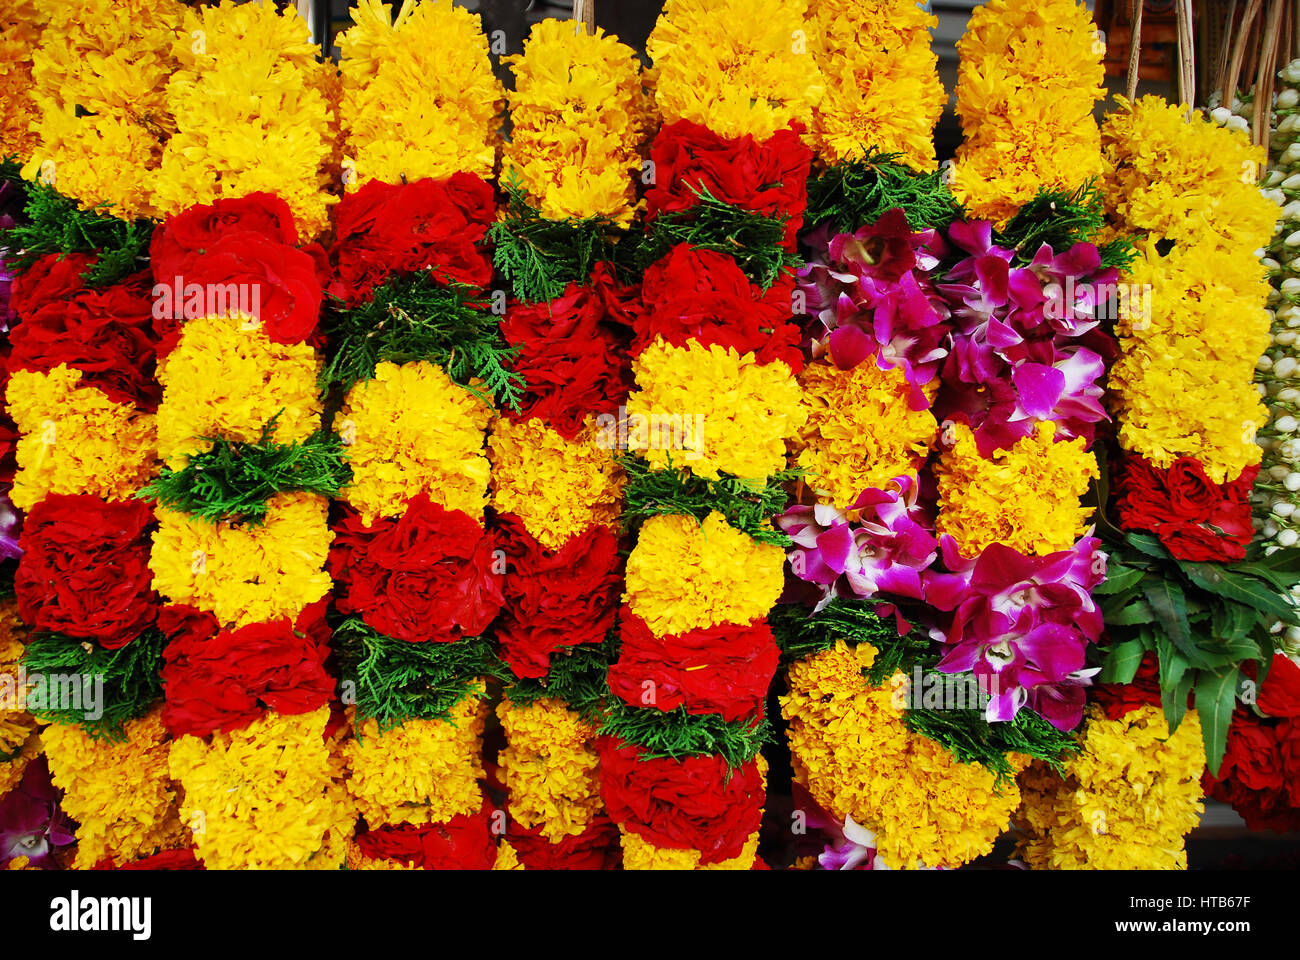 Indian Flower Garland - Stock image African Marigold, Marigold, Orchid, Single Flower, Close-up Stock Photo